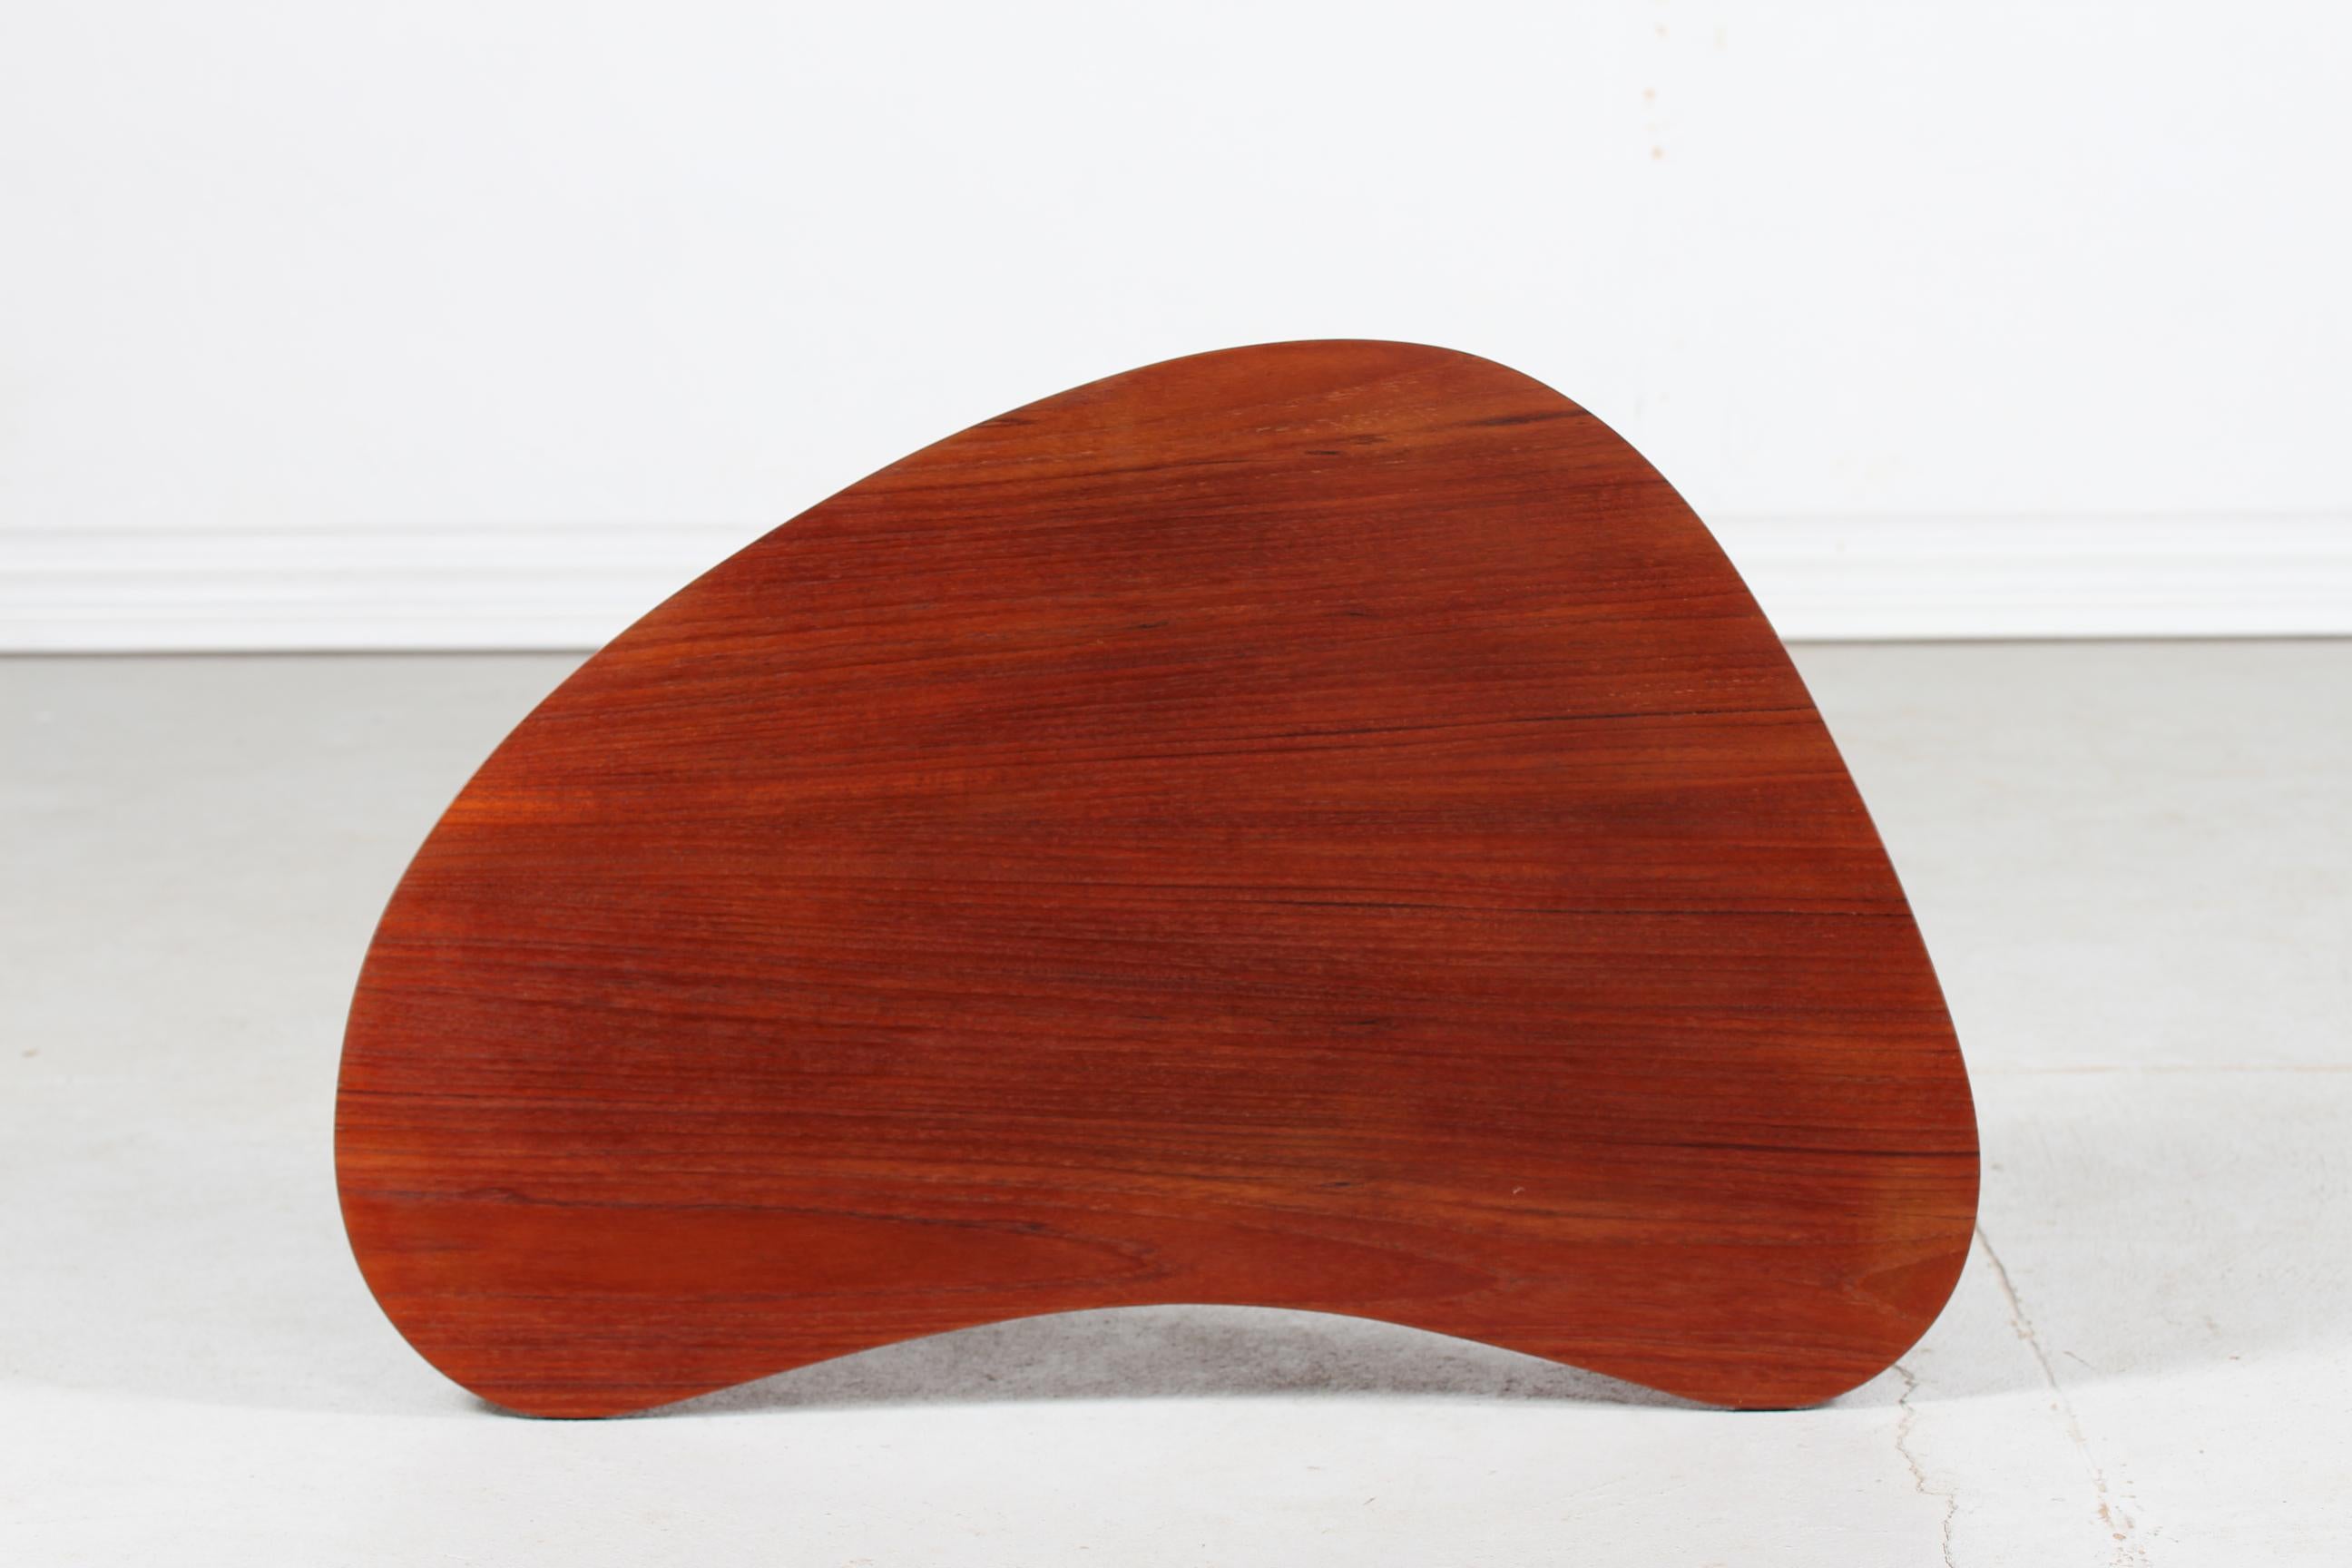 Danish Modern Organically Shaped Coffee Table of Teak and Beech, Denmark, 1950s For Sale 1